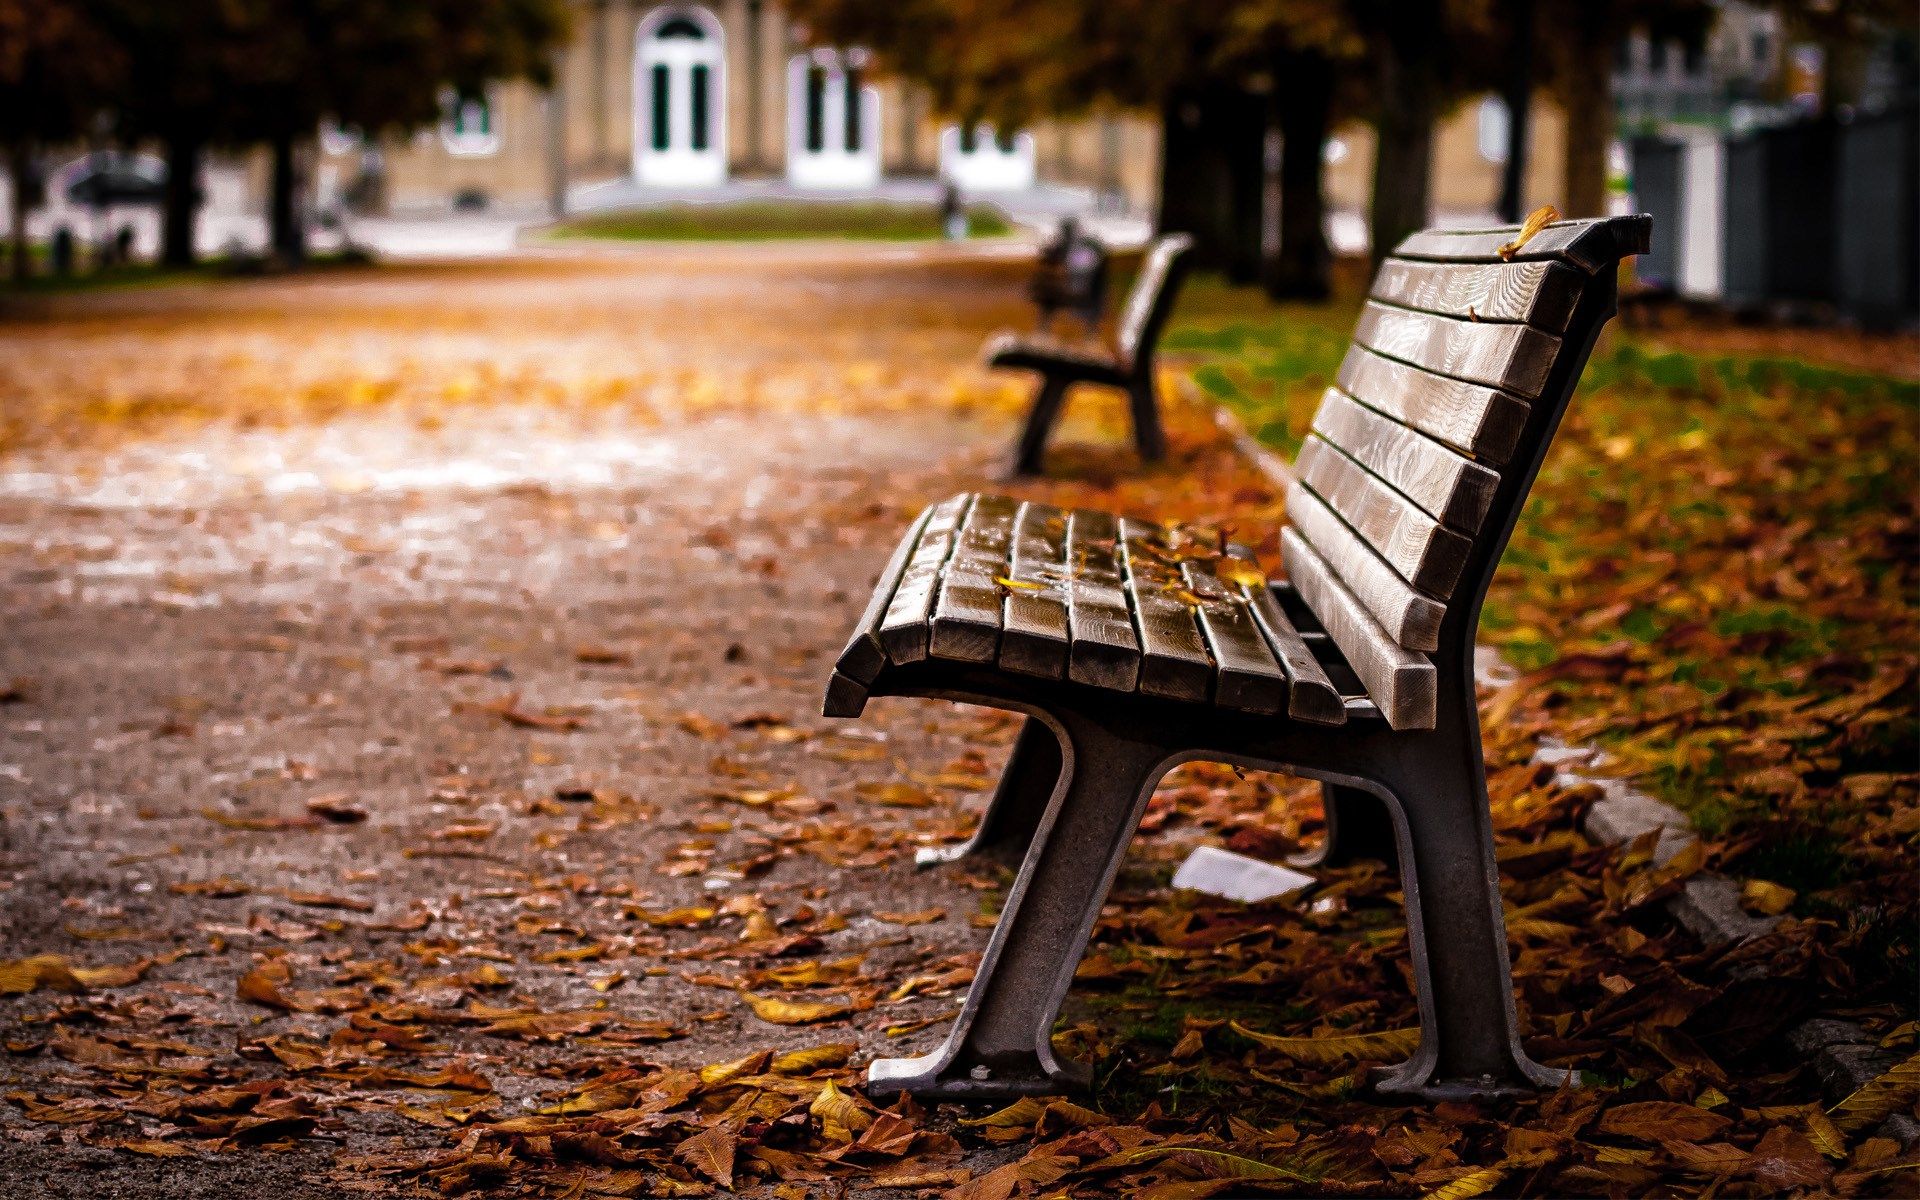 Bench Wallpaper. Bench Wallpaper, Lonely Bench Background and Forrest Gump Bench Wallpaper